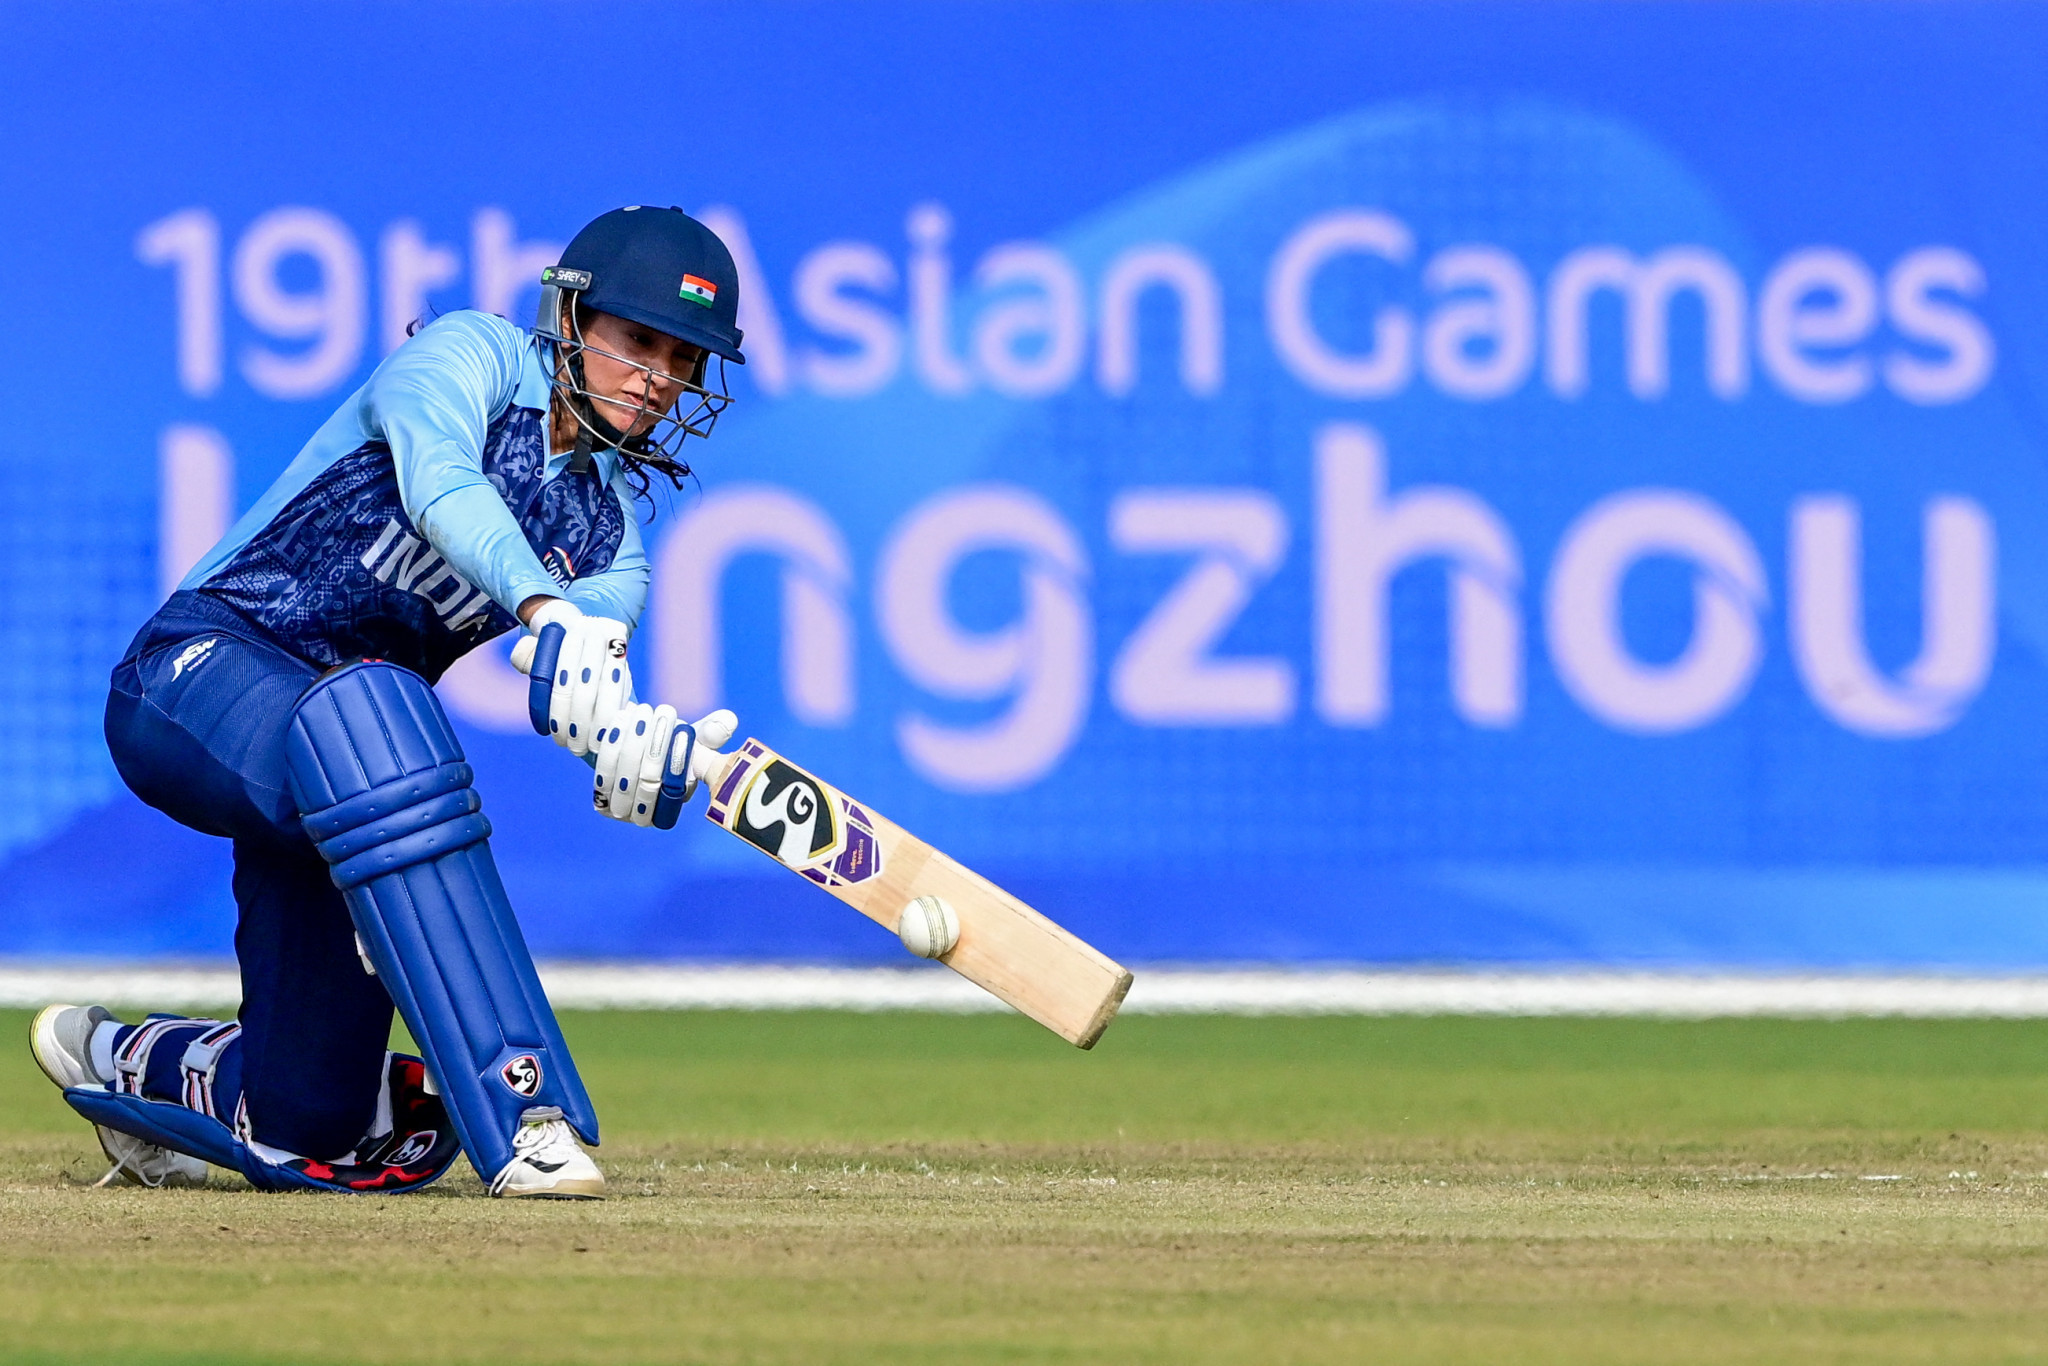 Smriti Mandhana's 46 runs powered India to their first Asian Games cricket gold medal in history ©Getty Images